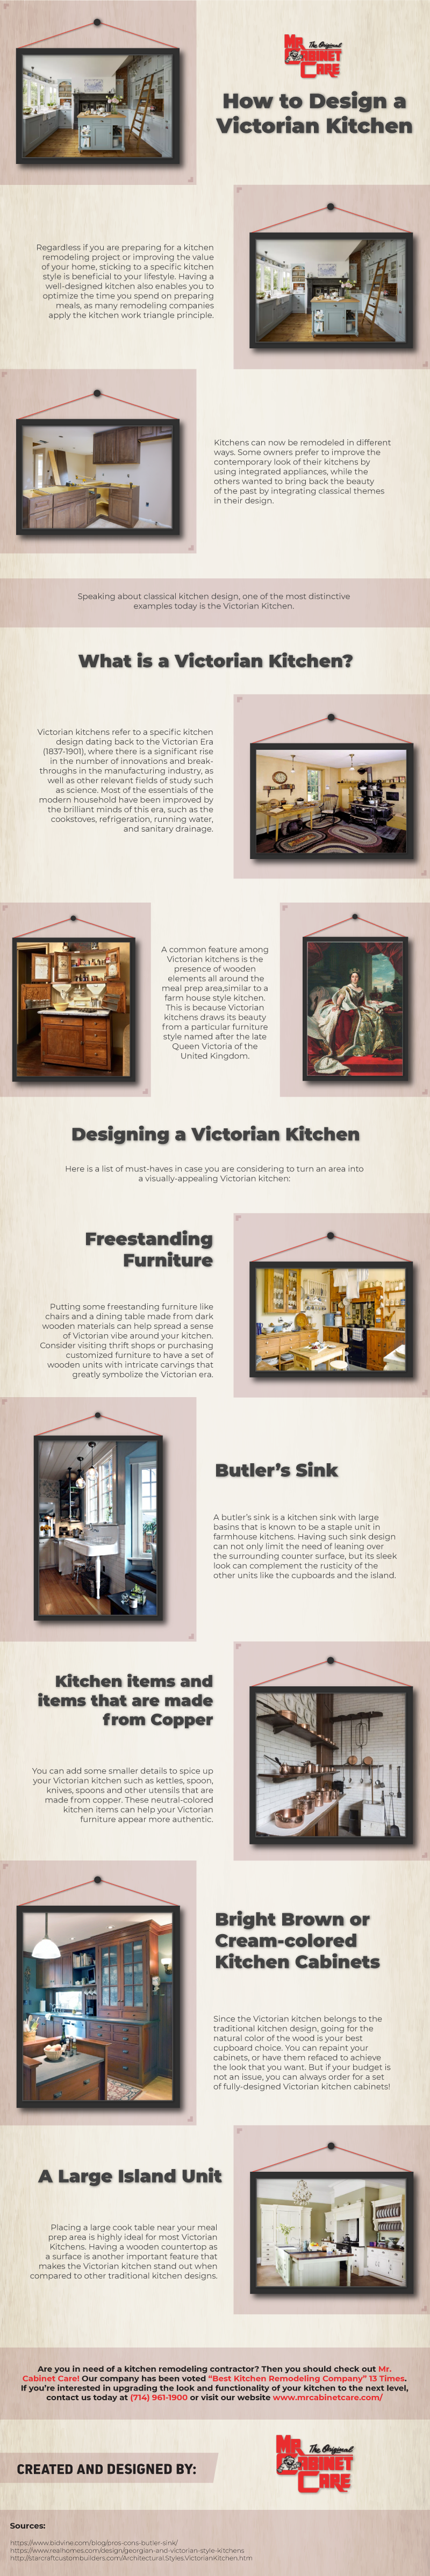 How to Design a Victorian Kitchen Infographic